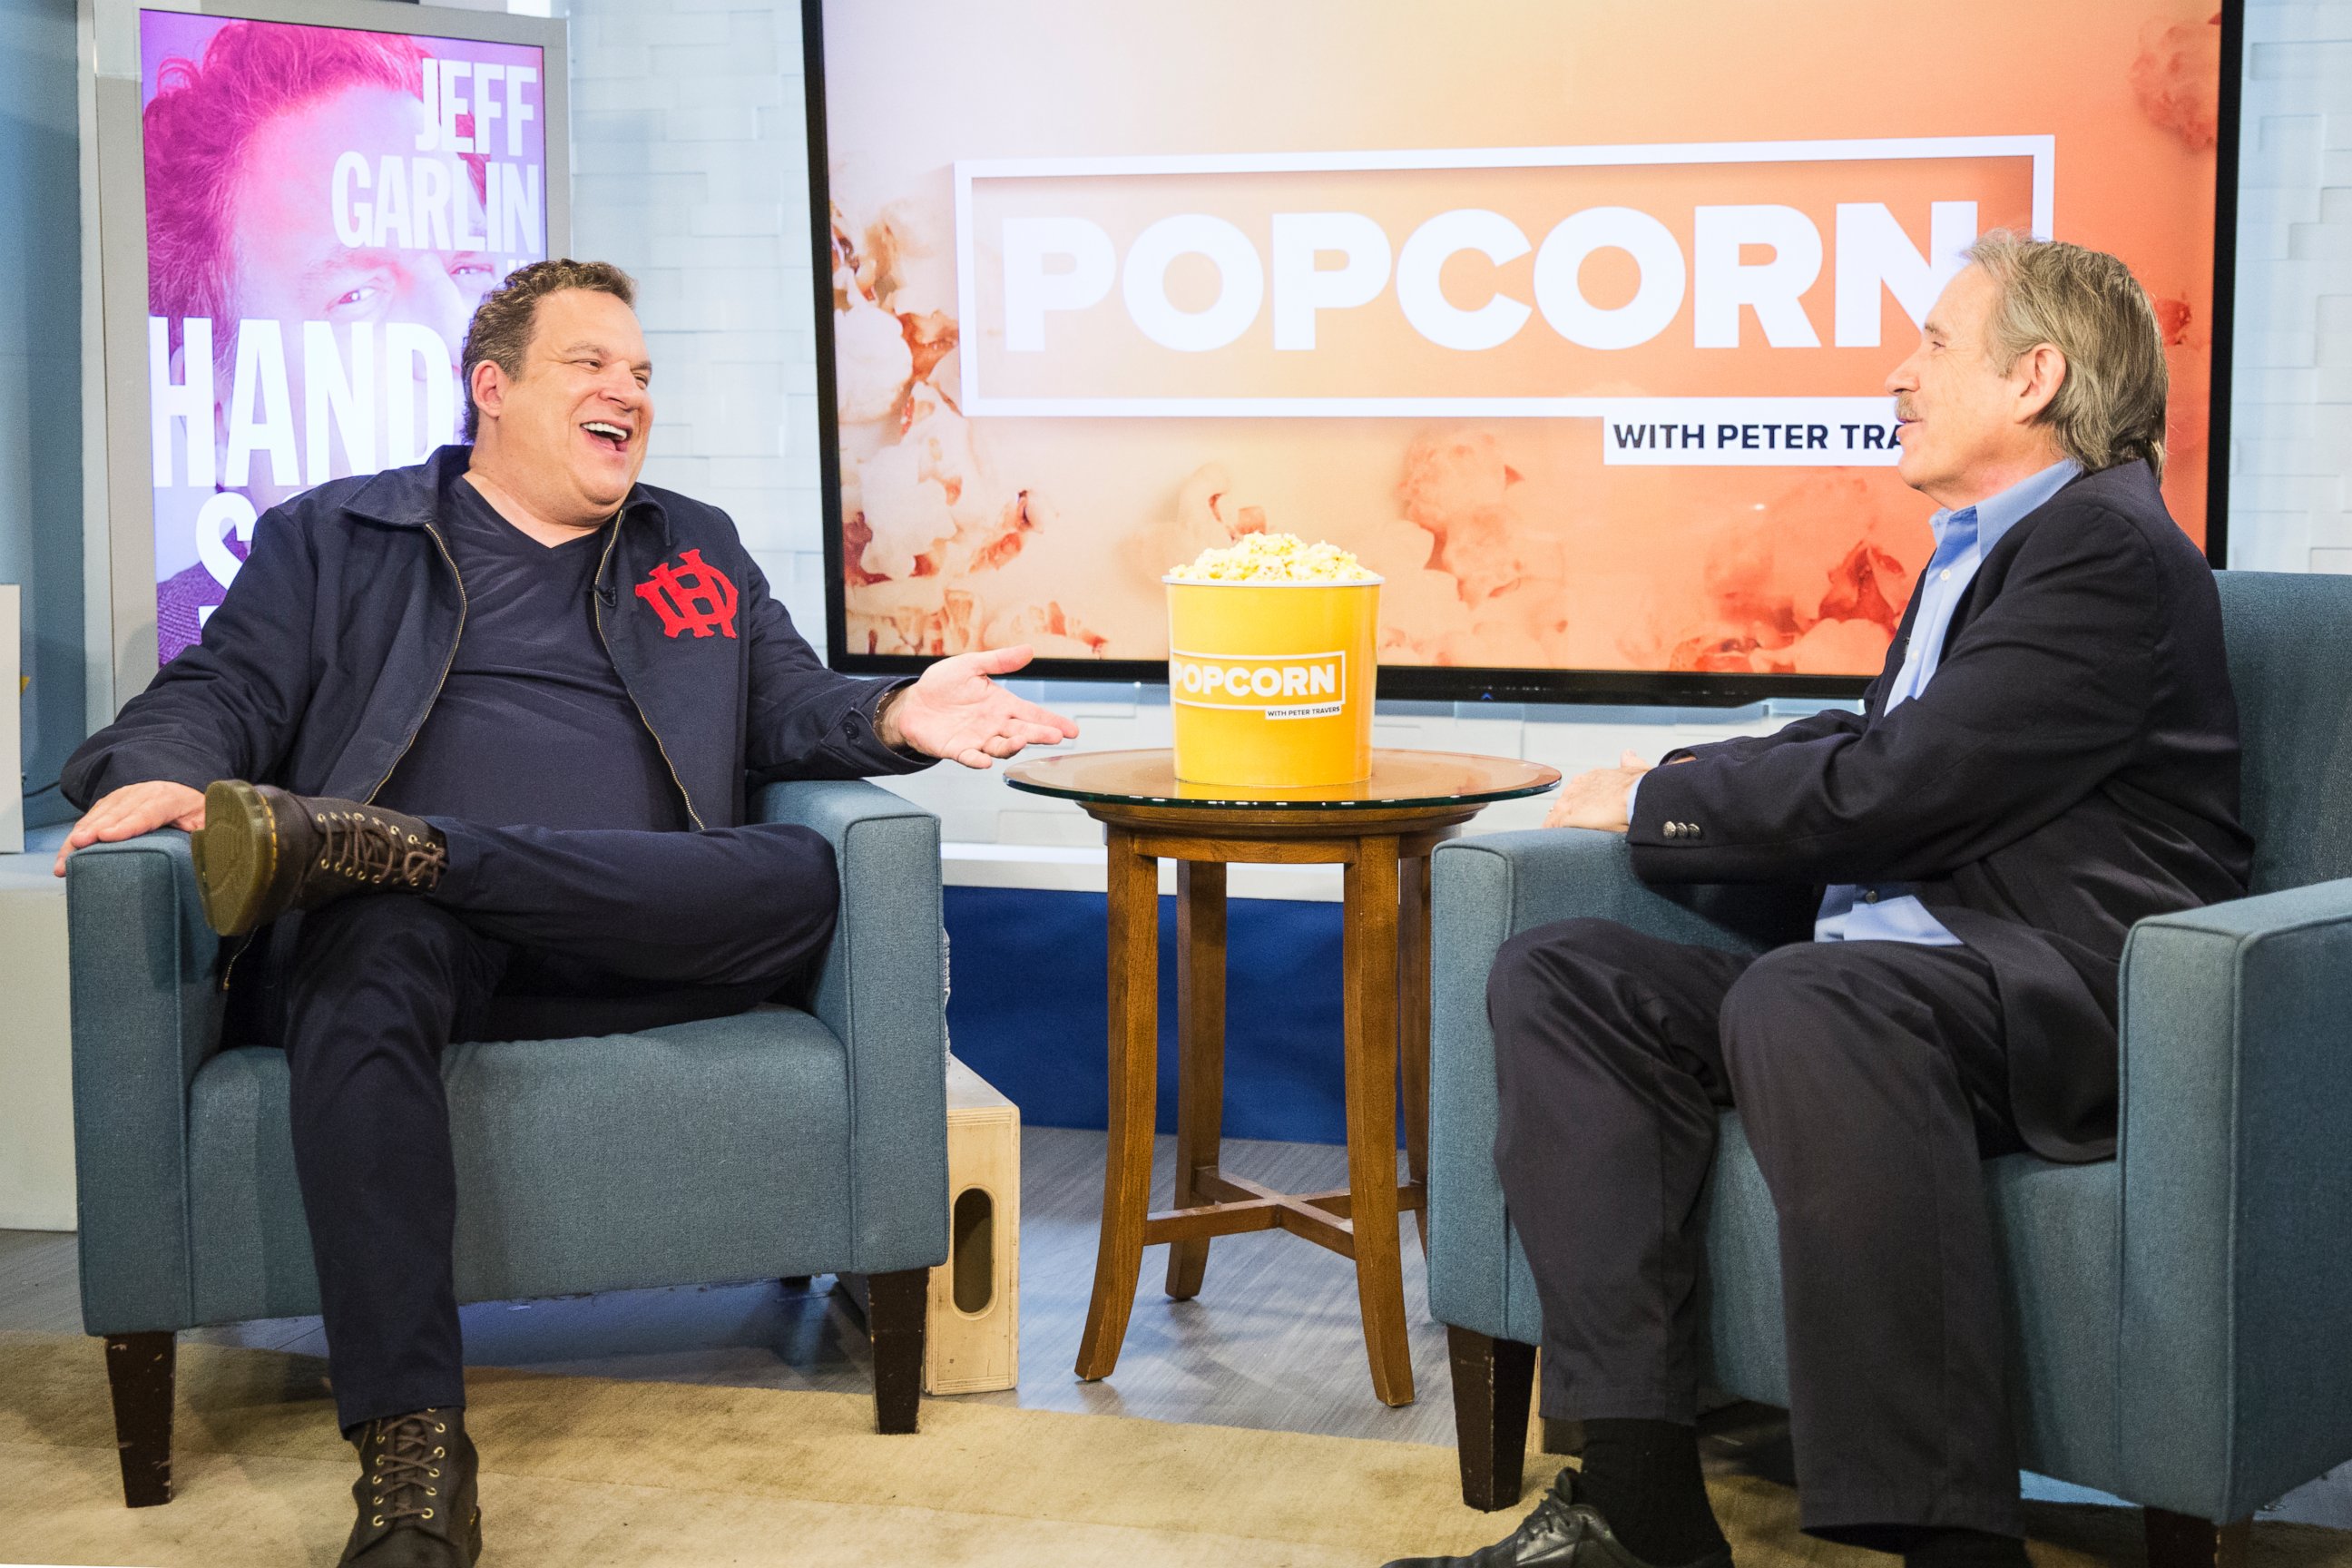 PHOTO: Jeff Garlin and Peter Travers at the ABC News studios in New York, May 3, 2017. 